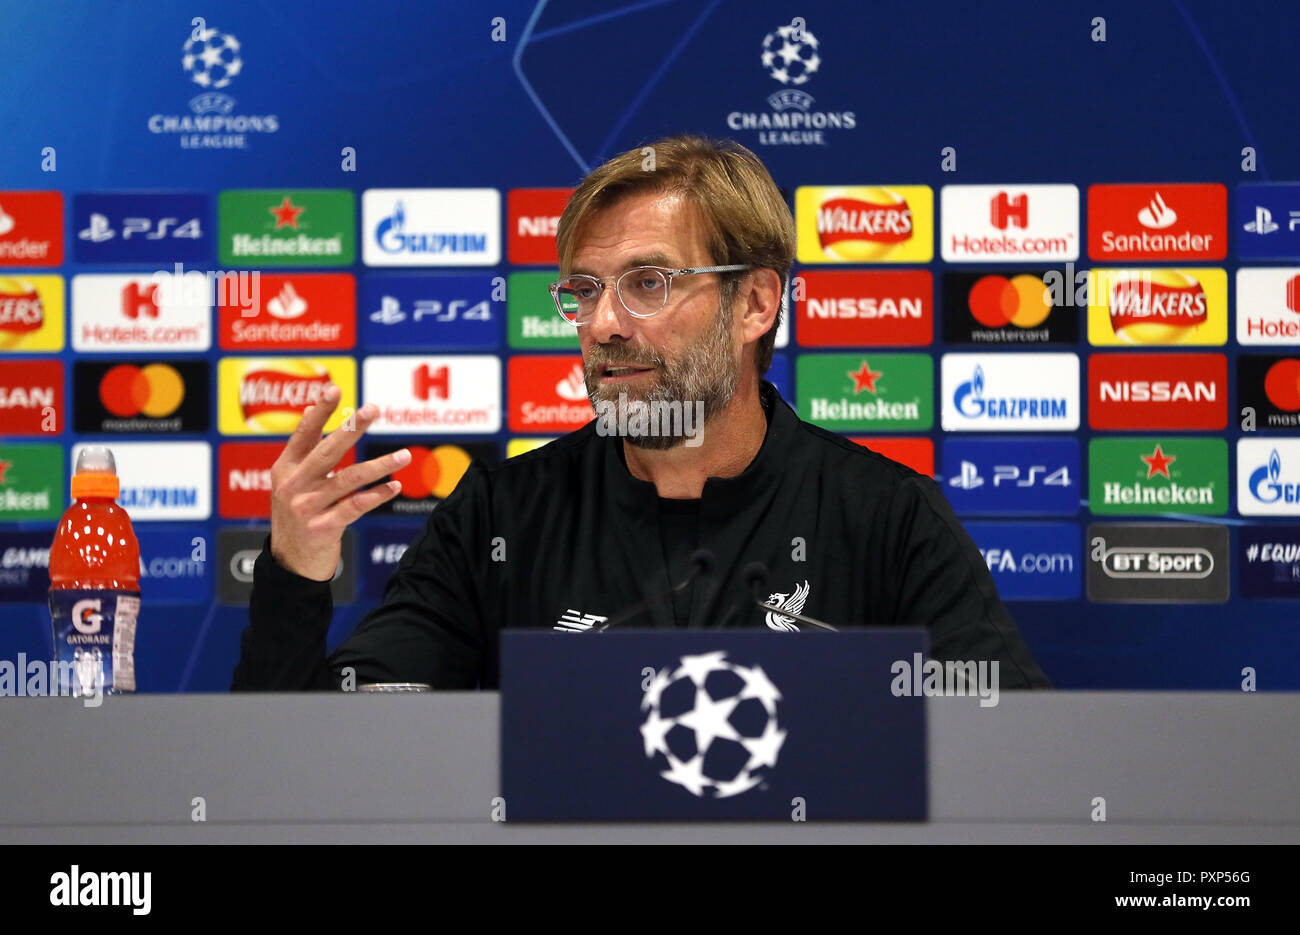 Liverpool manager Jurgen Klopp during the press conference at Anfield, Liverpool. PRESS ASSOCIATION Photo. Picture date: Tuesday October 23, 2018. See PA story SOCCER Liverpool. Photo credit should read: Richard Sellers/PA Wire Stock Photo